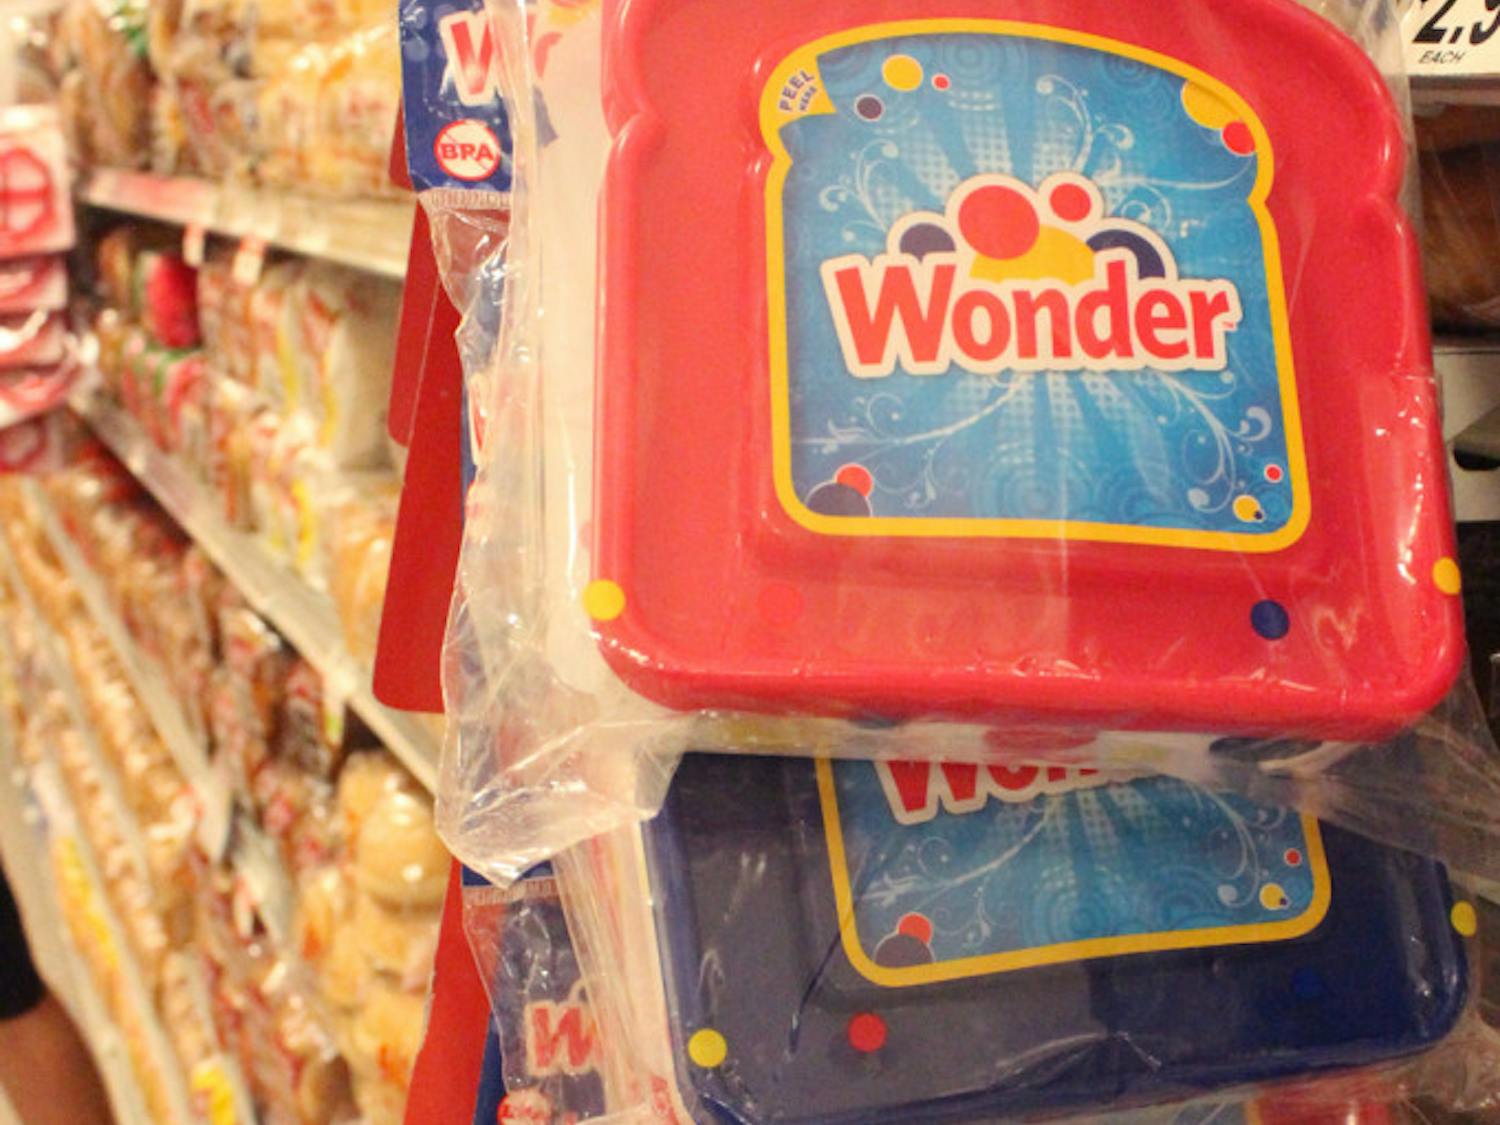 Wonder Bread is returning to grocery stores after being on hiatus for about a year when its former producer went bankrupt.